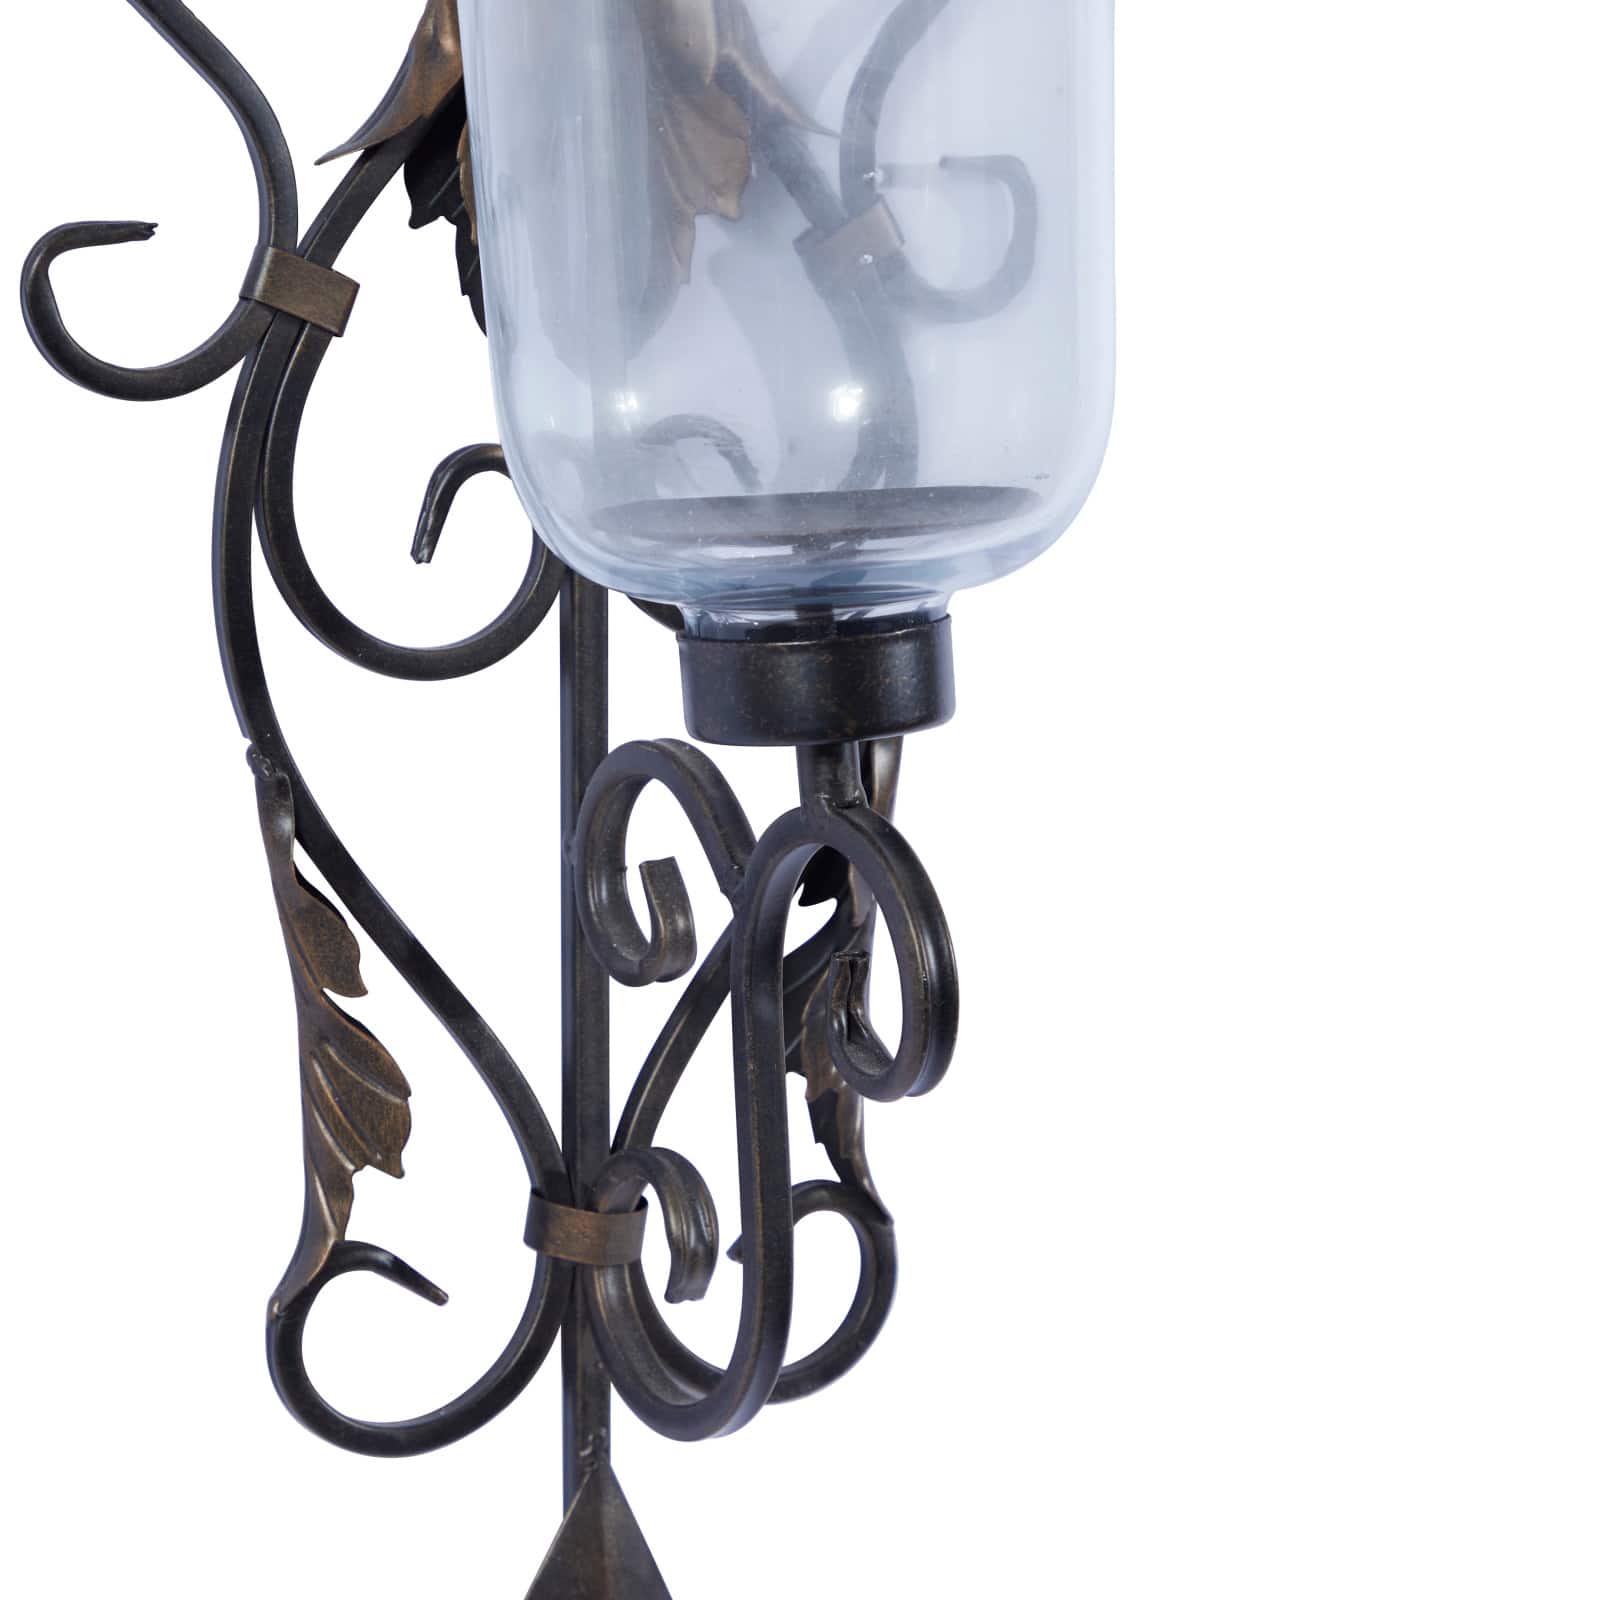 Gold Glass Rustic Candle Wall Sconce, 37&#x22; x 13&#x22; x 9&#x22;